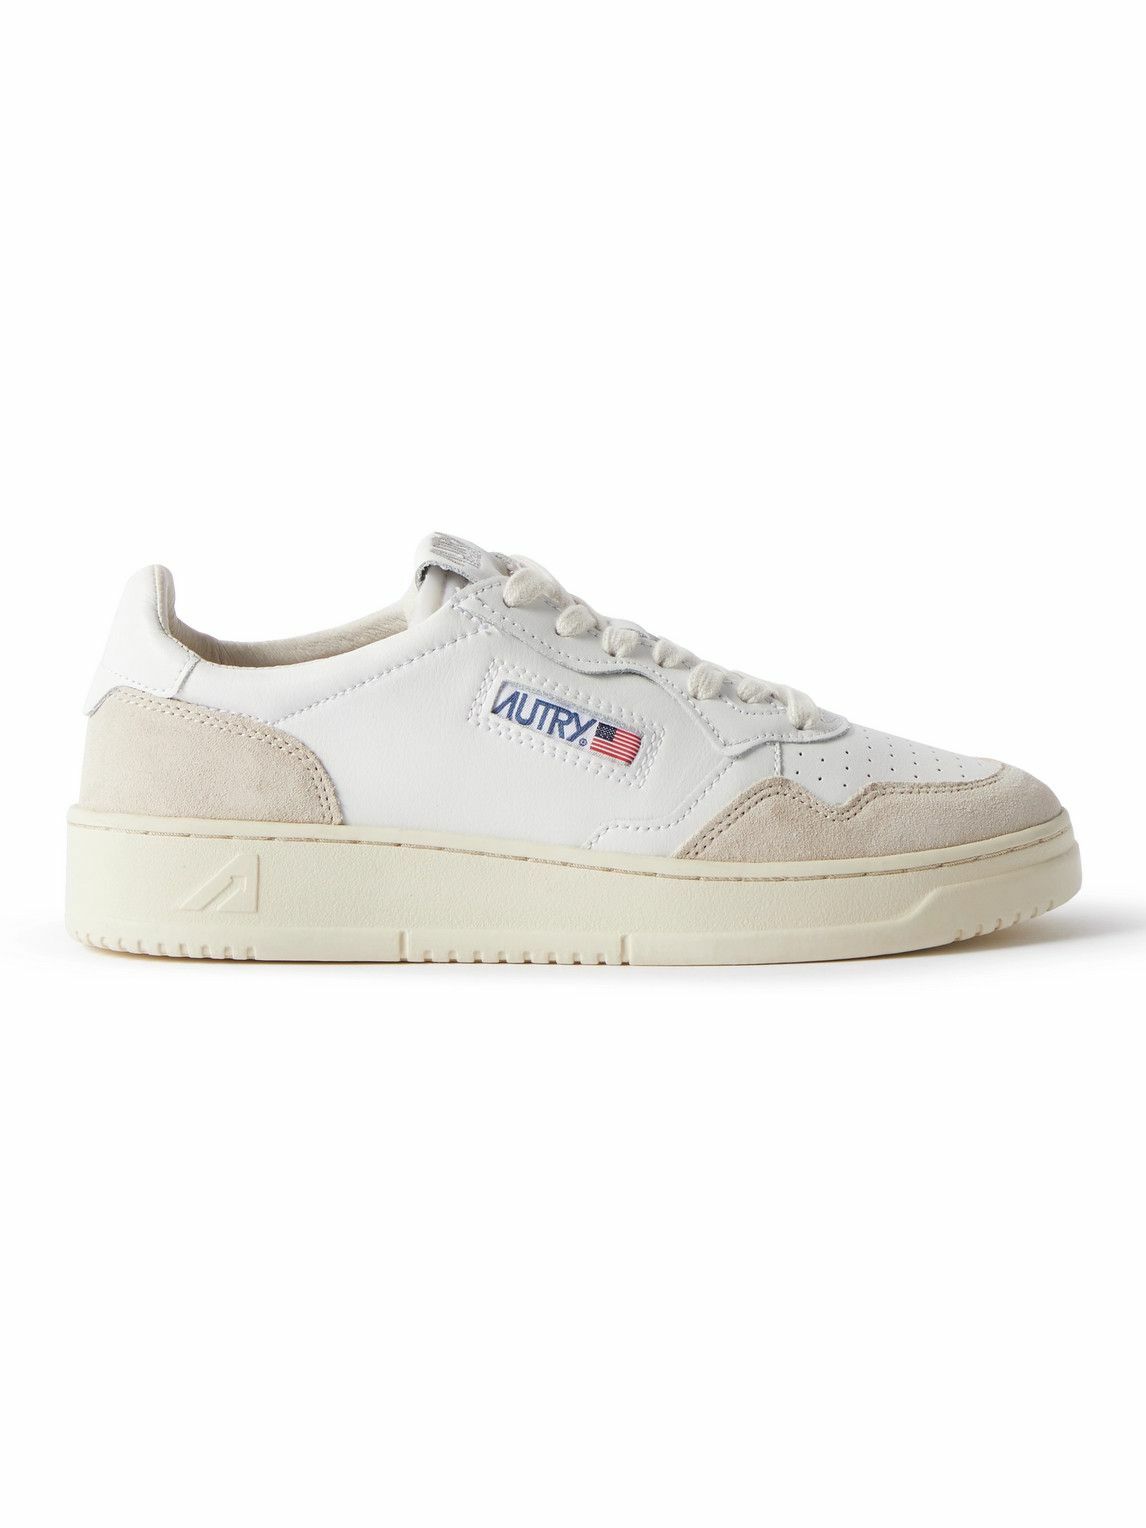 Autry - Medalist Two-Tone Suede-Trimmed Leather Sneakers - White Autry